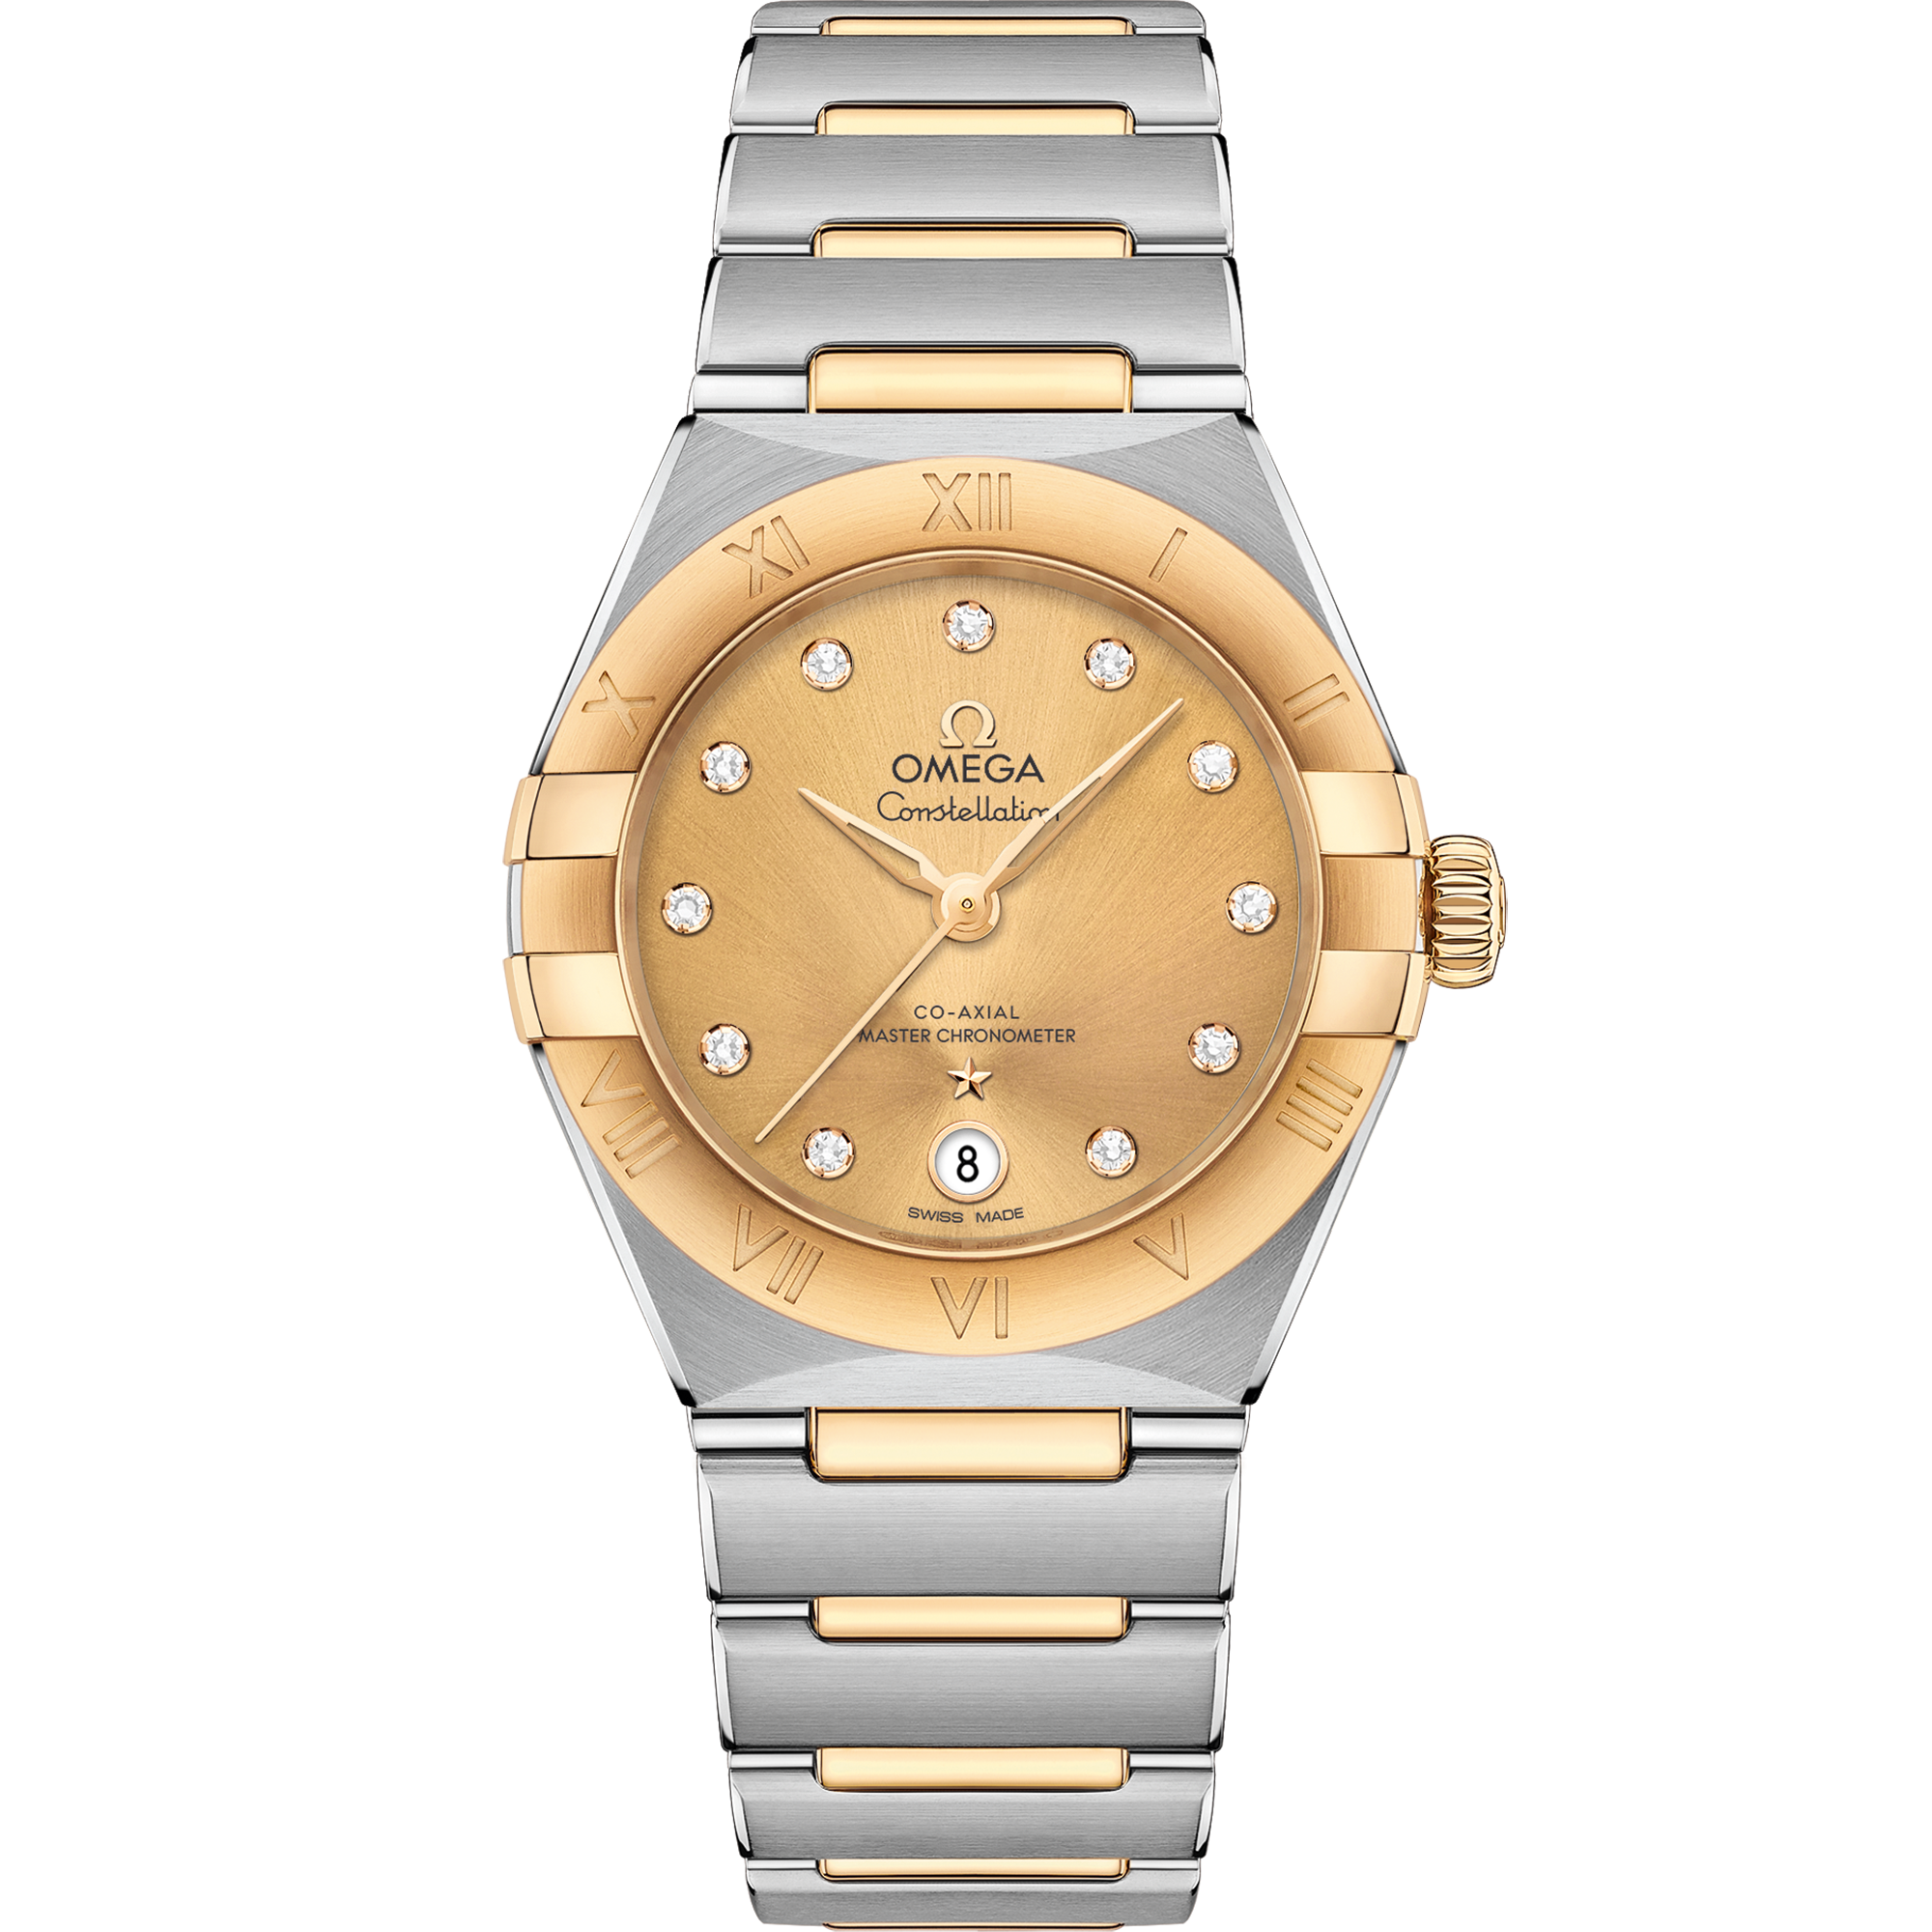 Constellation 29 mm, steel - yellow gold on steel - yellow gold - 131.20.29.20.58.001